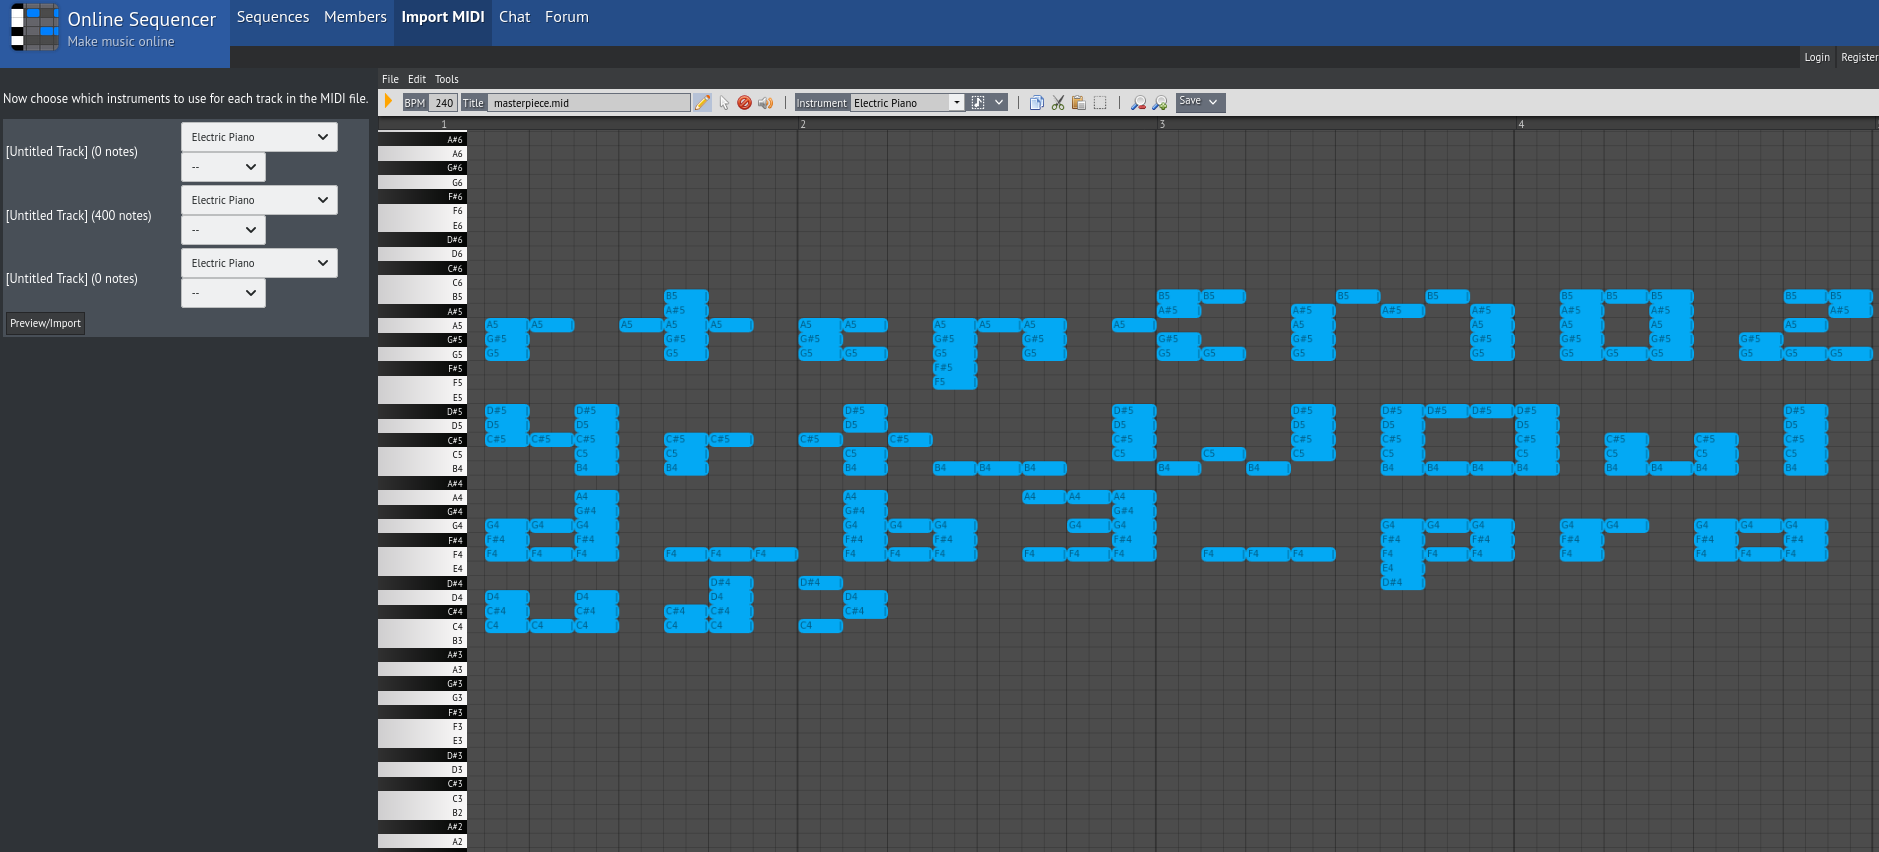 MIDI visualisation showing text rtcp{M0Z4rt_WOuld_b3_proud}